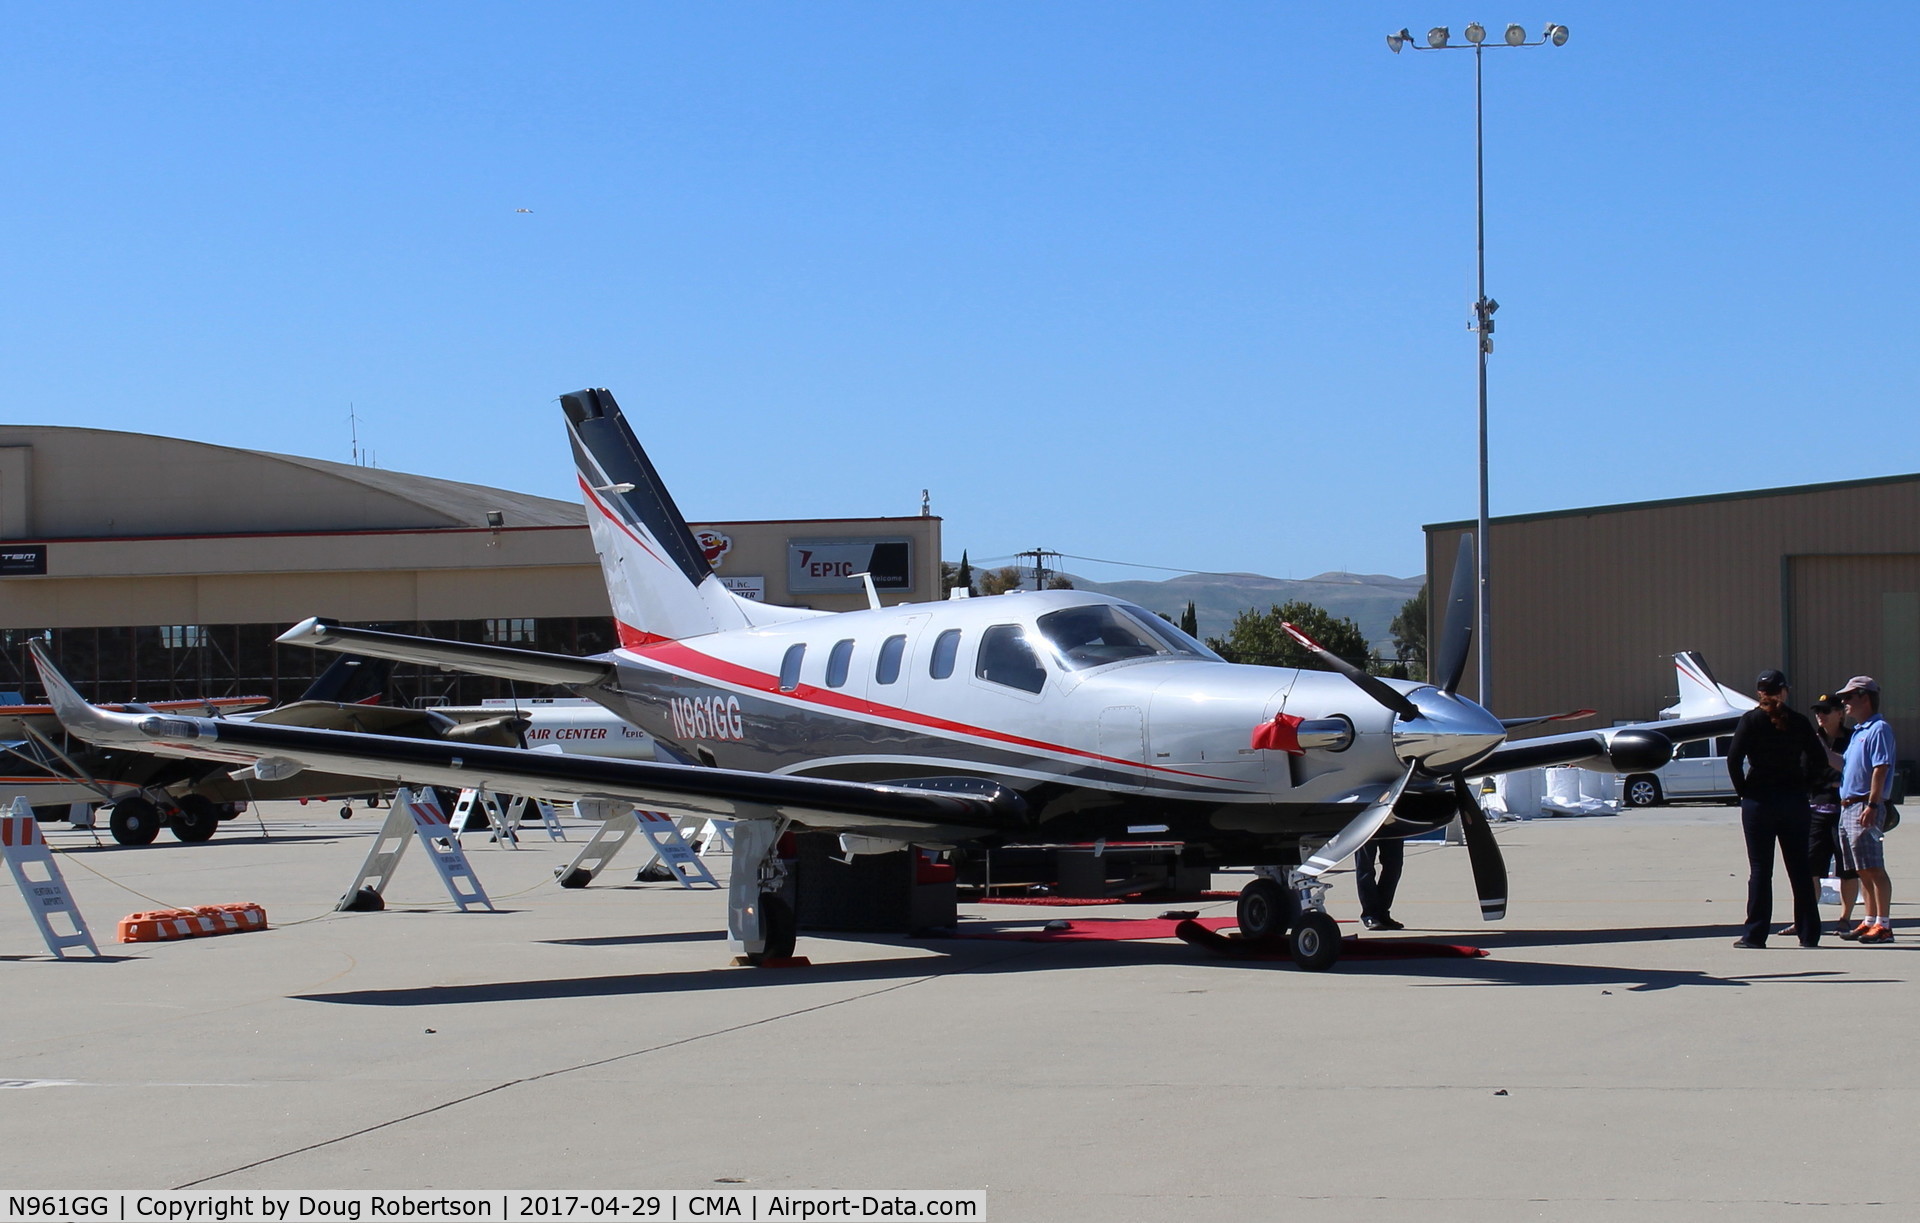 N961GG, 2016 Daher-Socata TBM-700 C/N 1111, 2016 DAHER SOCATA TBM 700, one P&W(C)PT-66D flat rated at 850 sHp, 5 blade CS prop, winglets, at AOPA FLY-IN